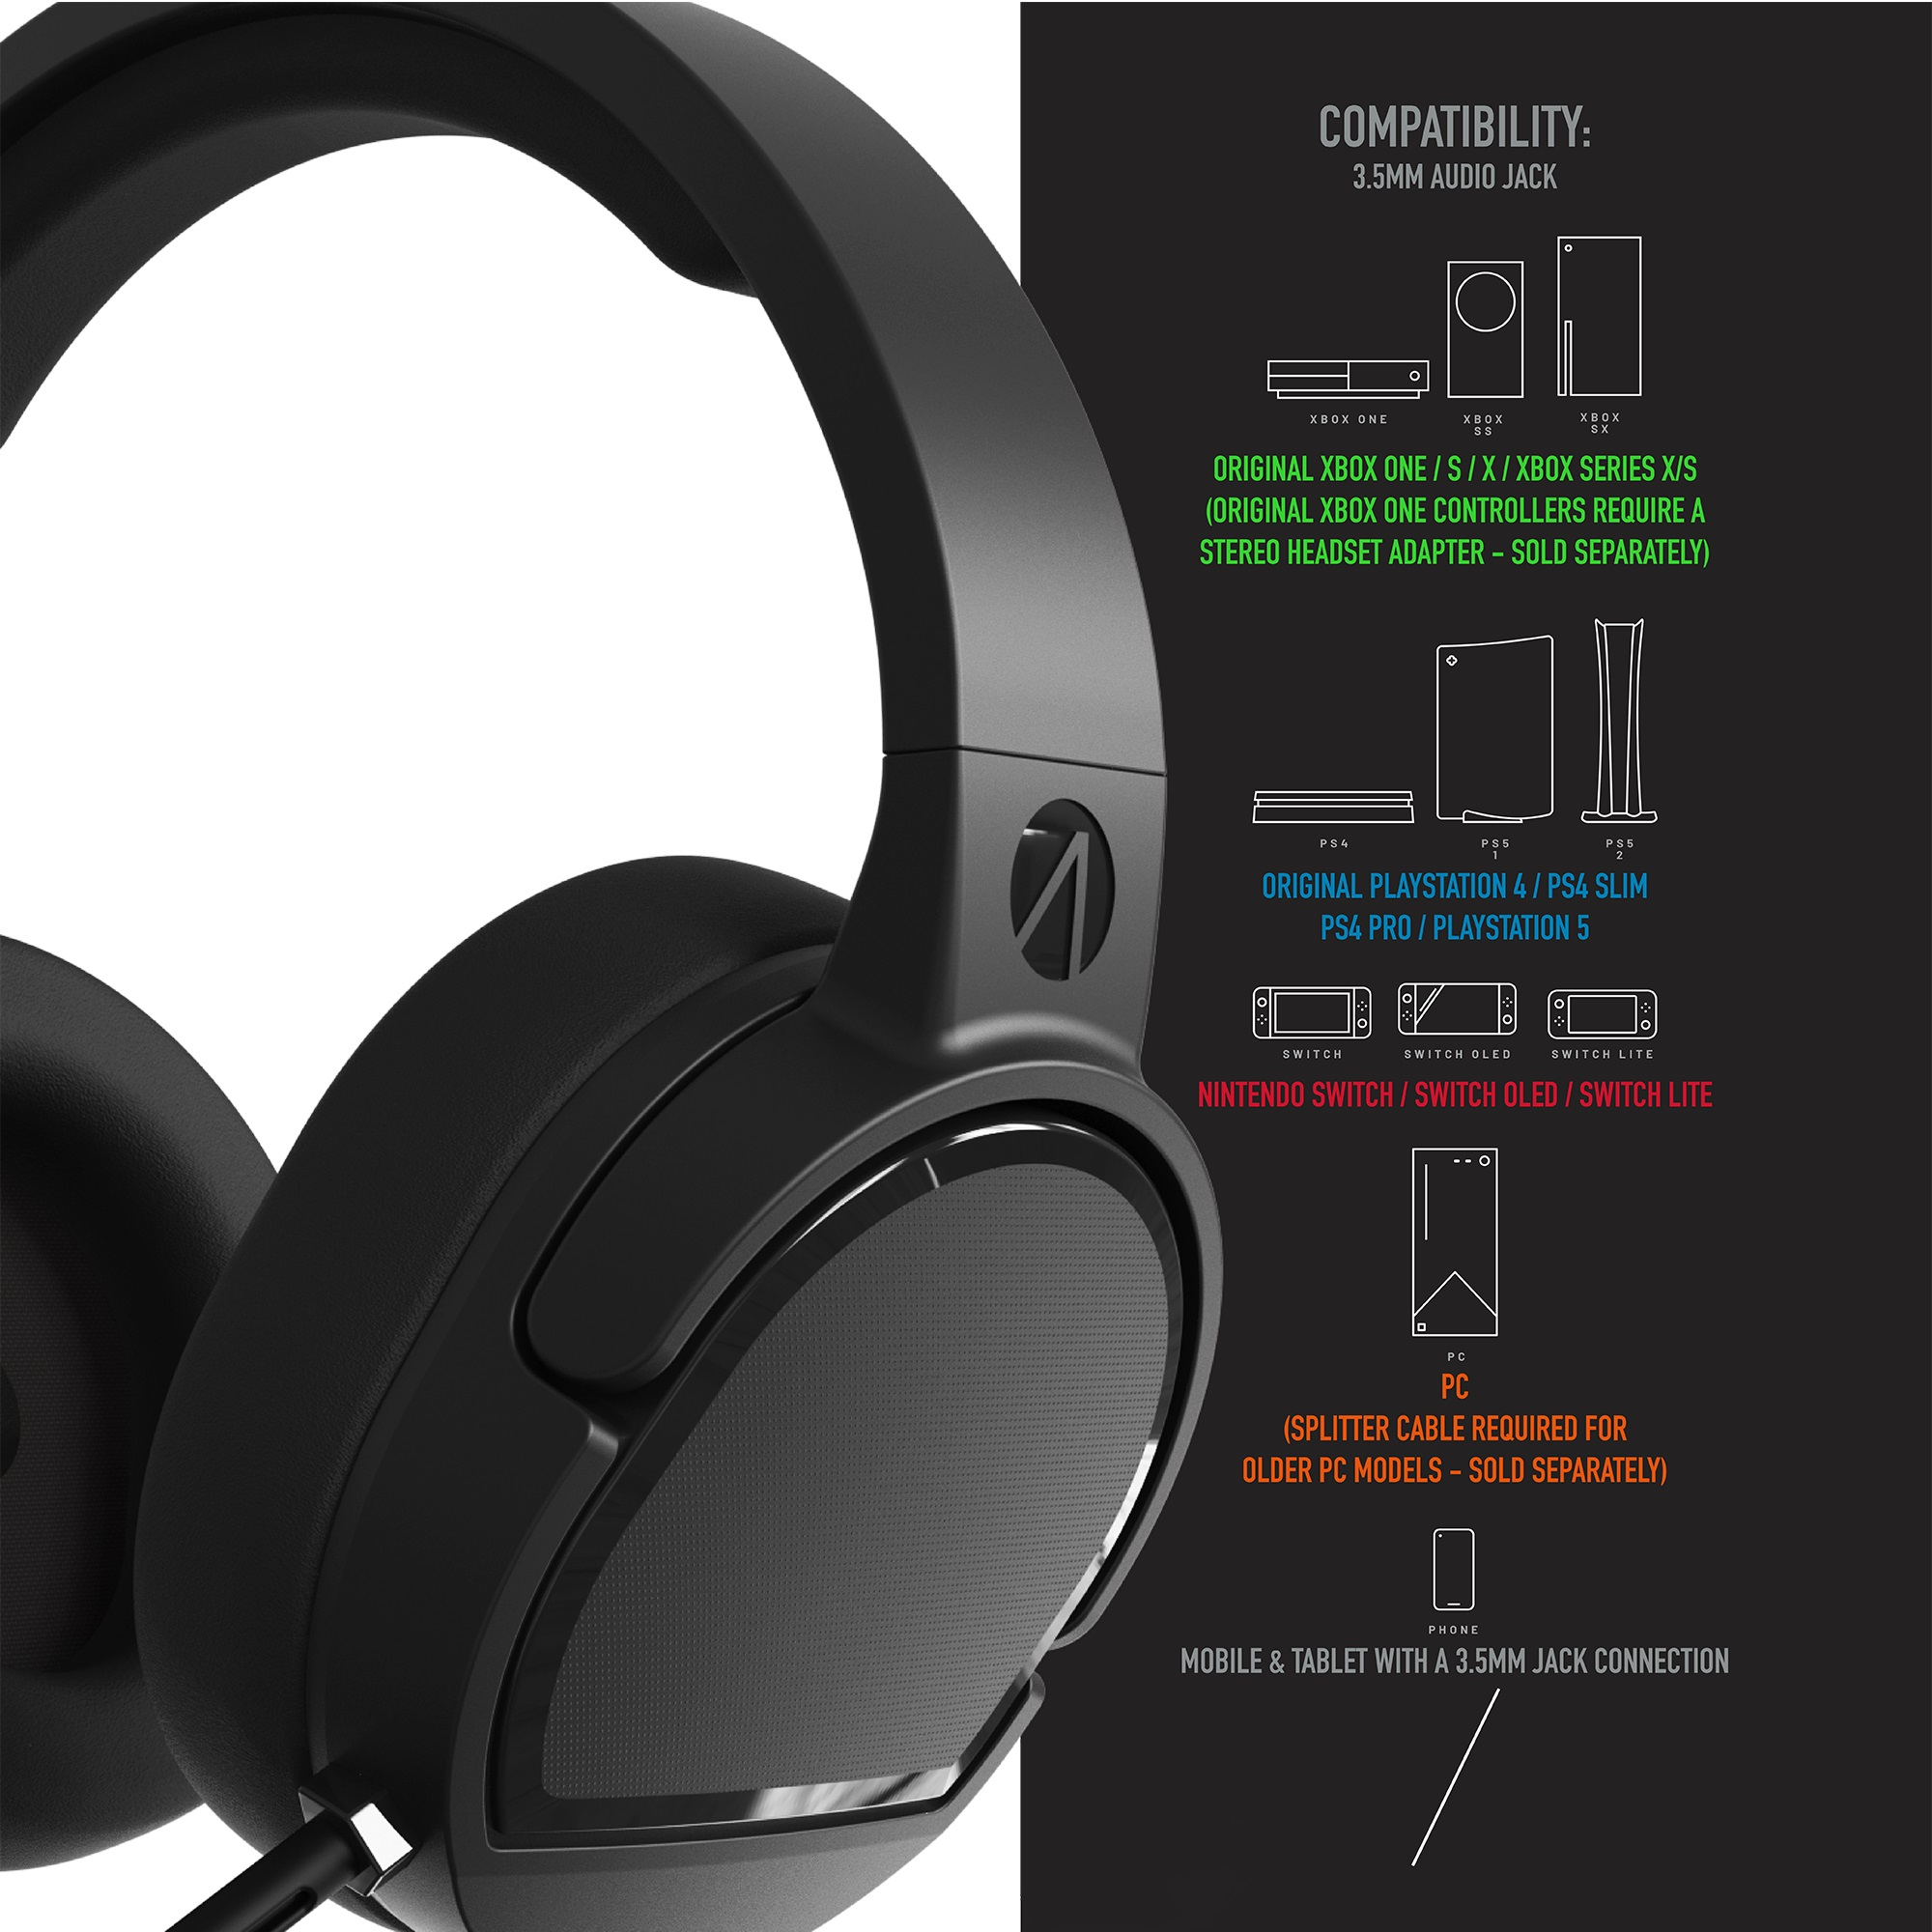 (PS4/PS5/XBOX/NSW), Over-ear Headset Gaming Schwarz STEALTH Headset Gaming Panther